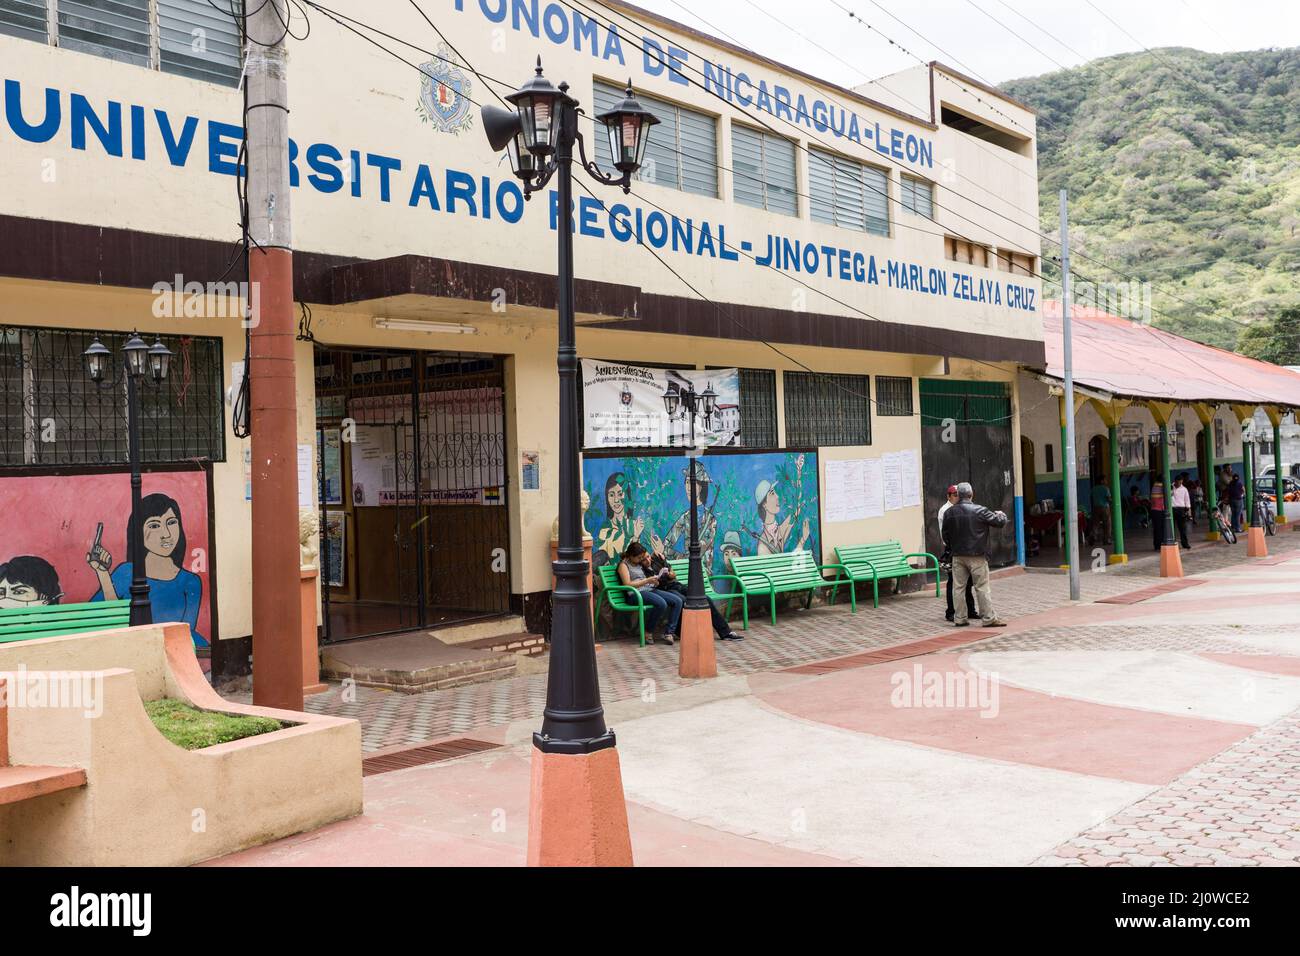 UNAN Leon - CUR Jinotega, a branch university in Jinotega, Nicaragua, is decorated with murals depicting scenes from the 1979 era revolution. Stock Photo